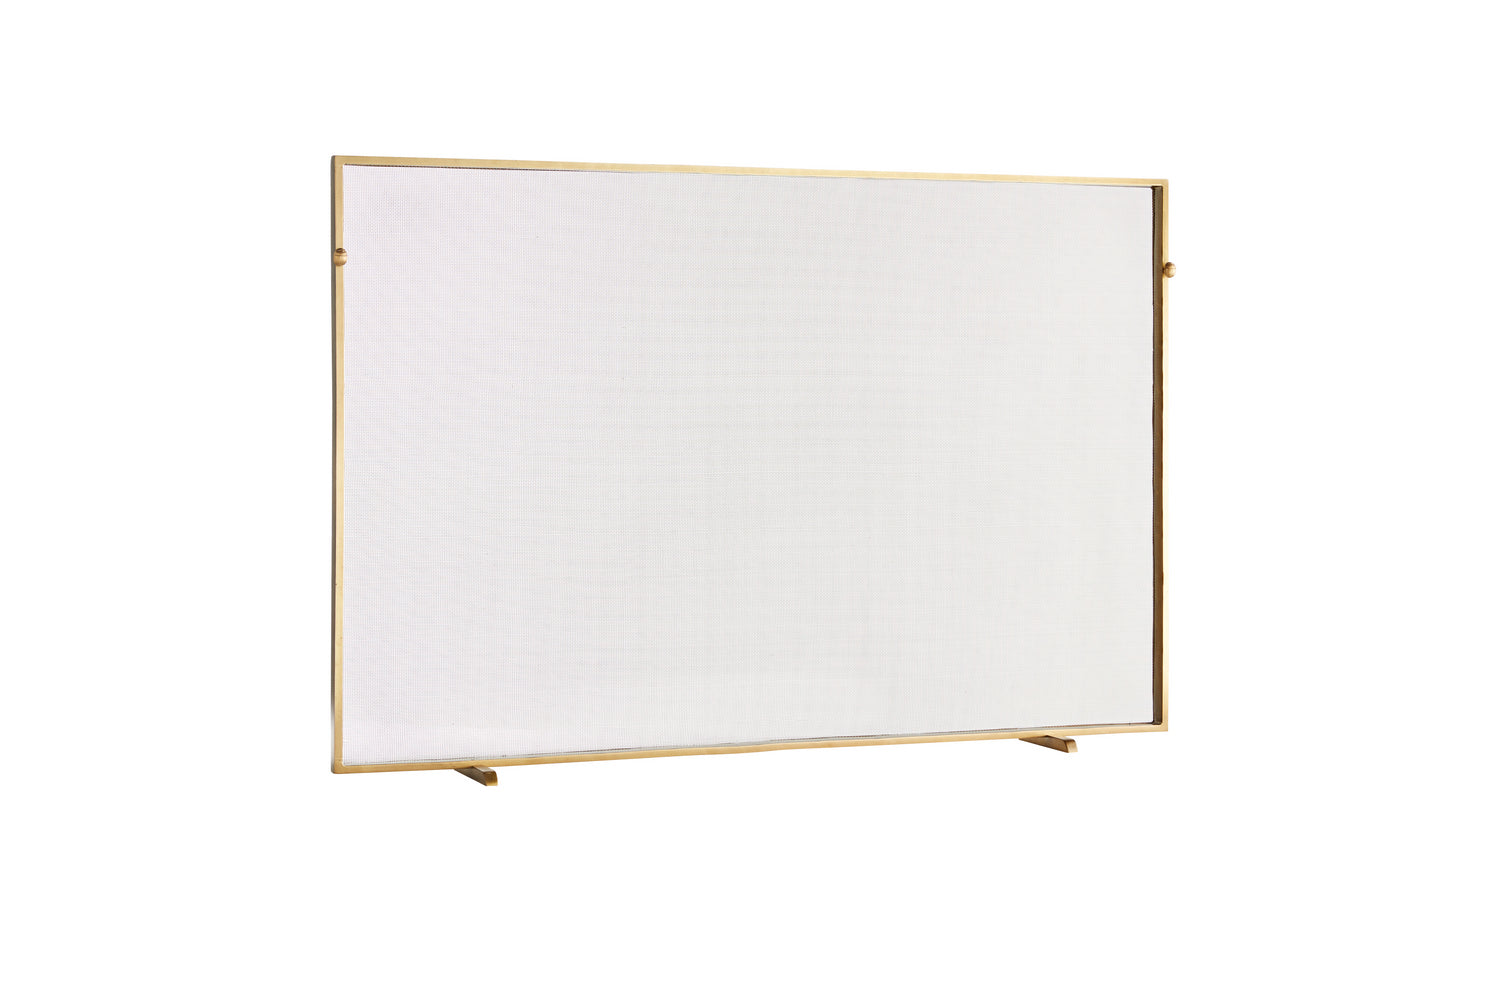 Fire Screen from the Gita collection in Antique Brass finish